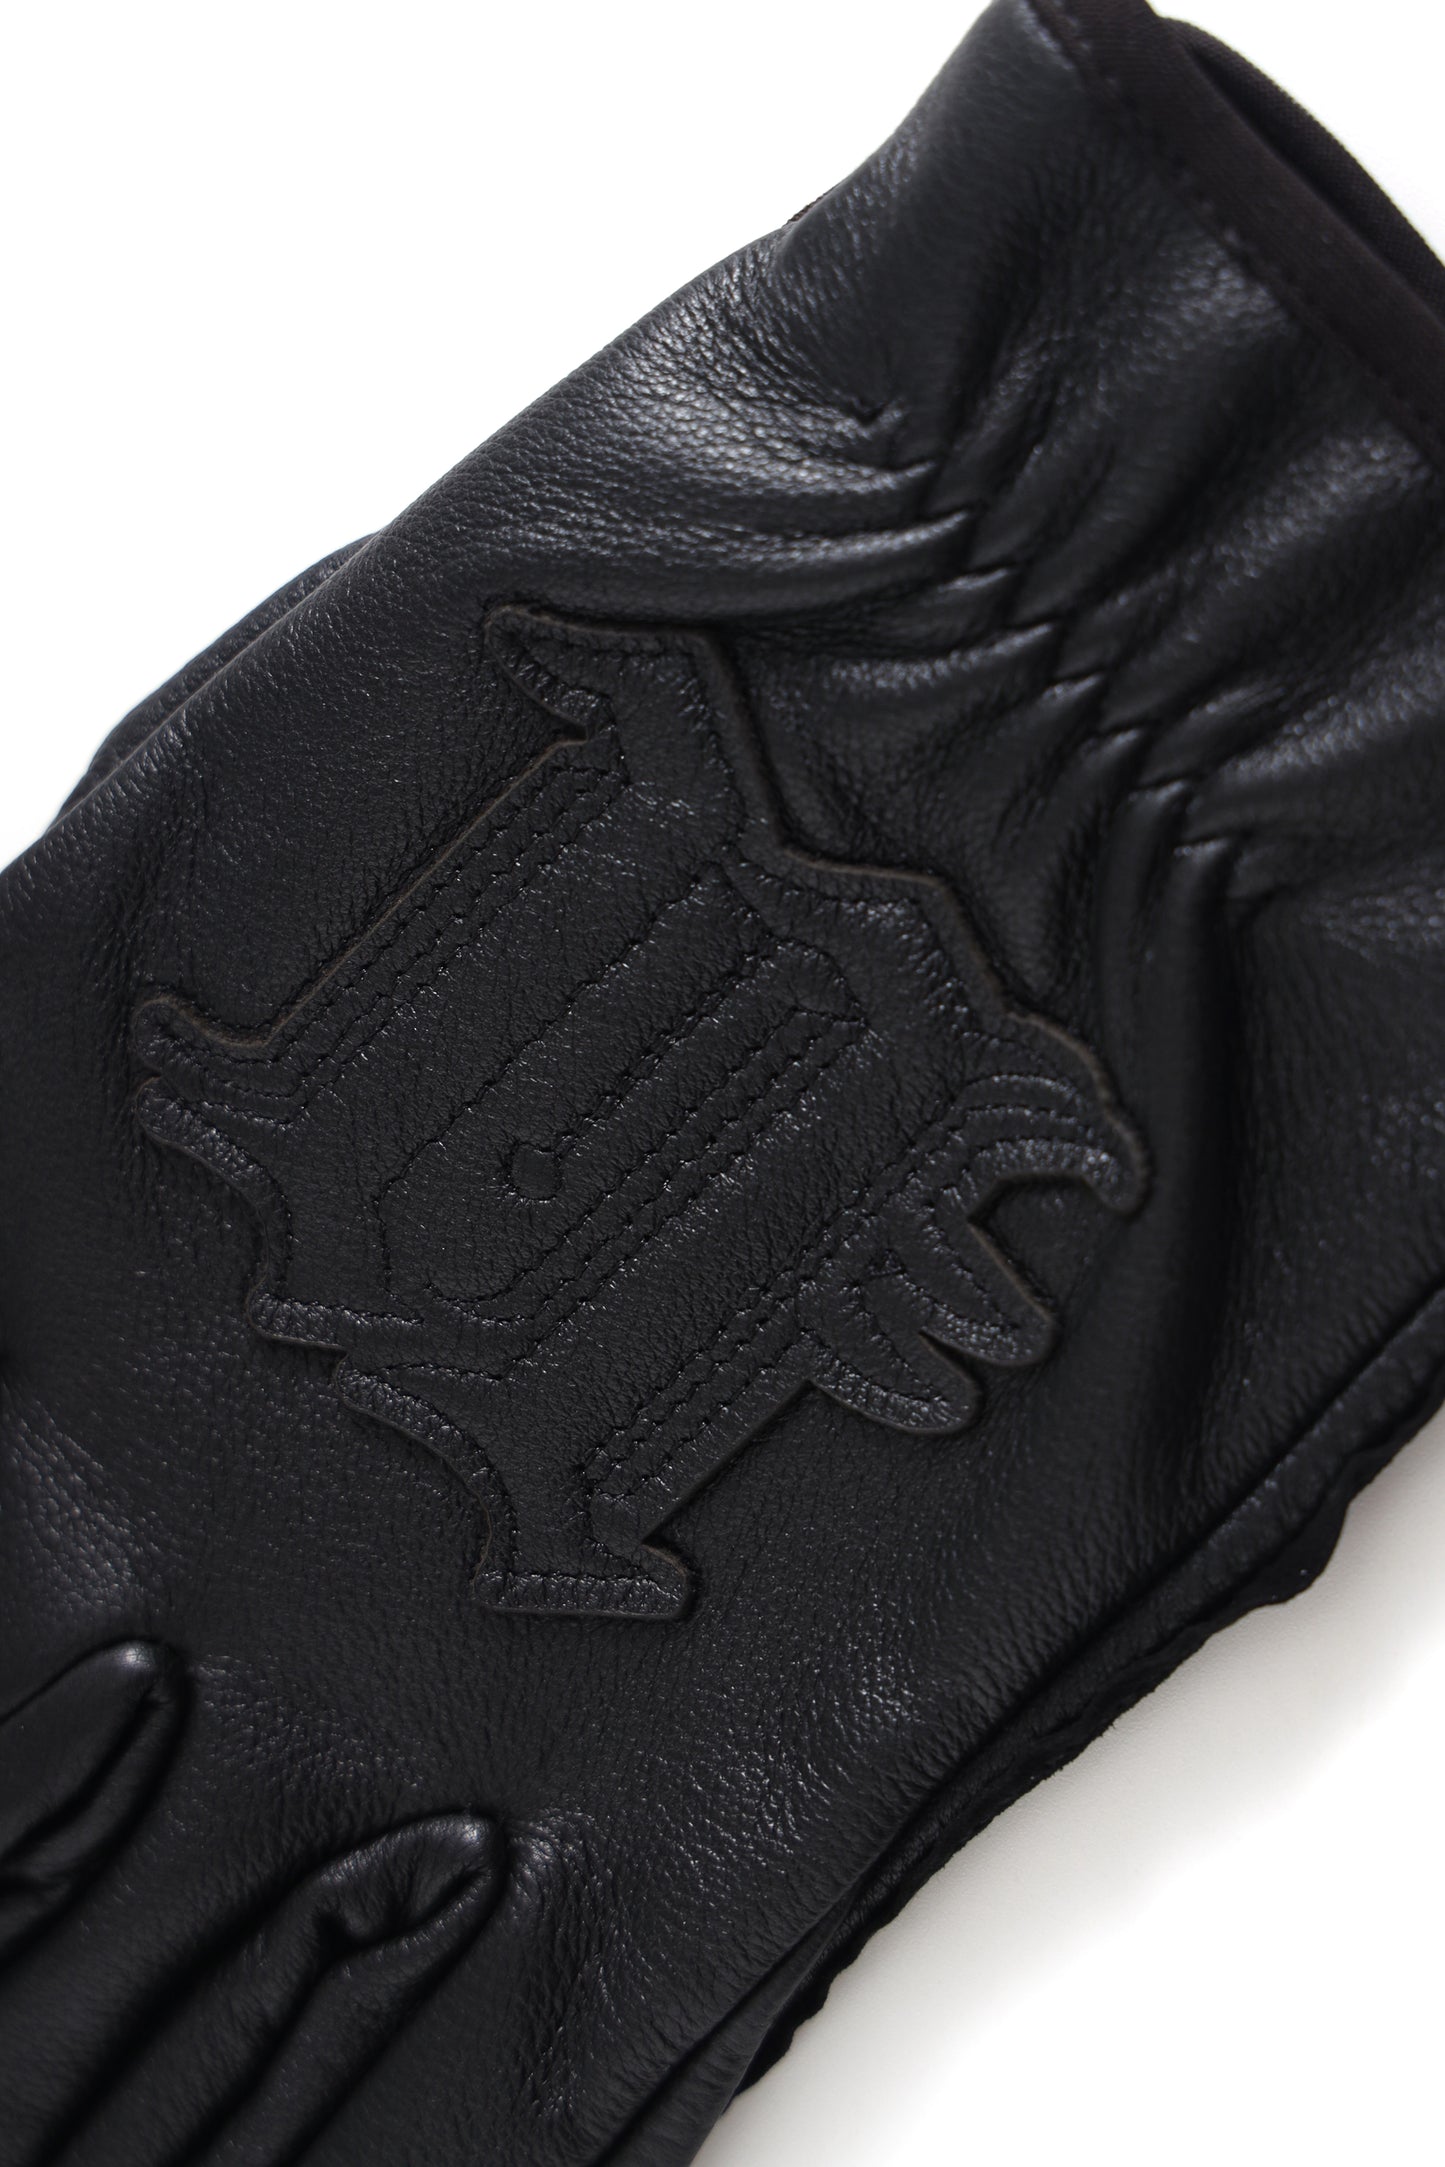 BLACKOUT LEATHER GLOVES